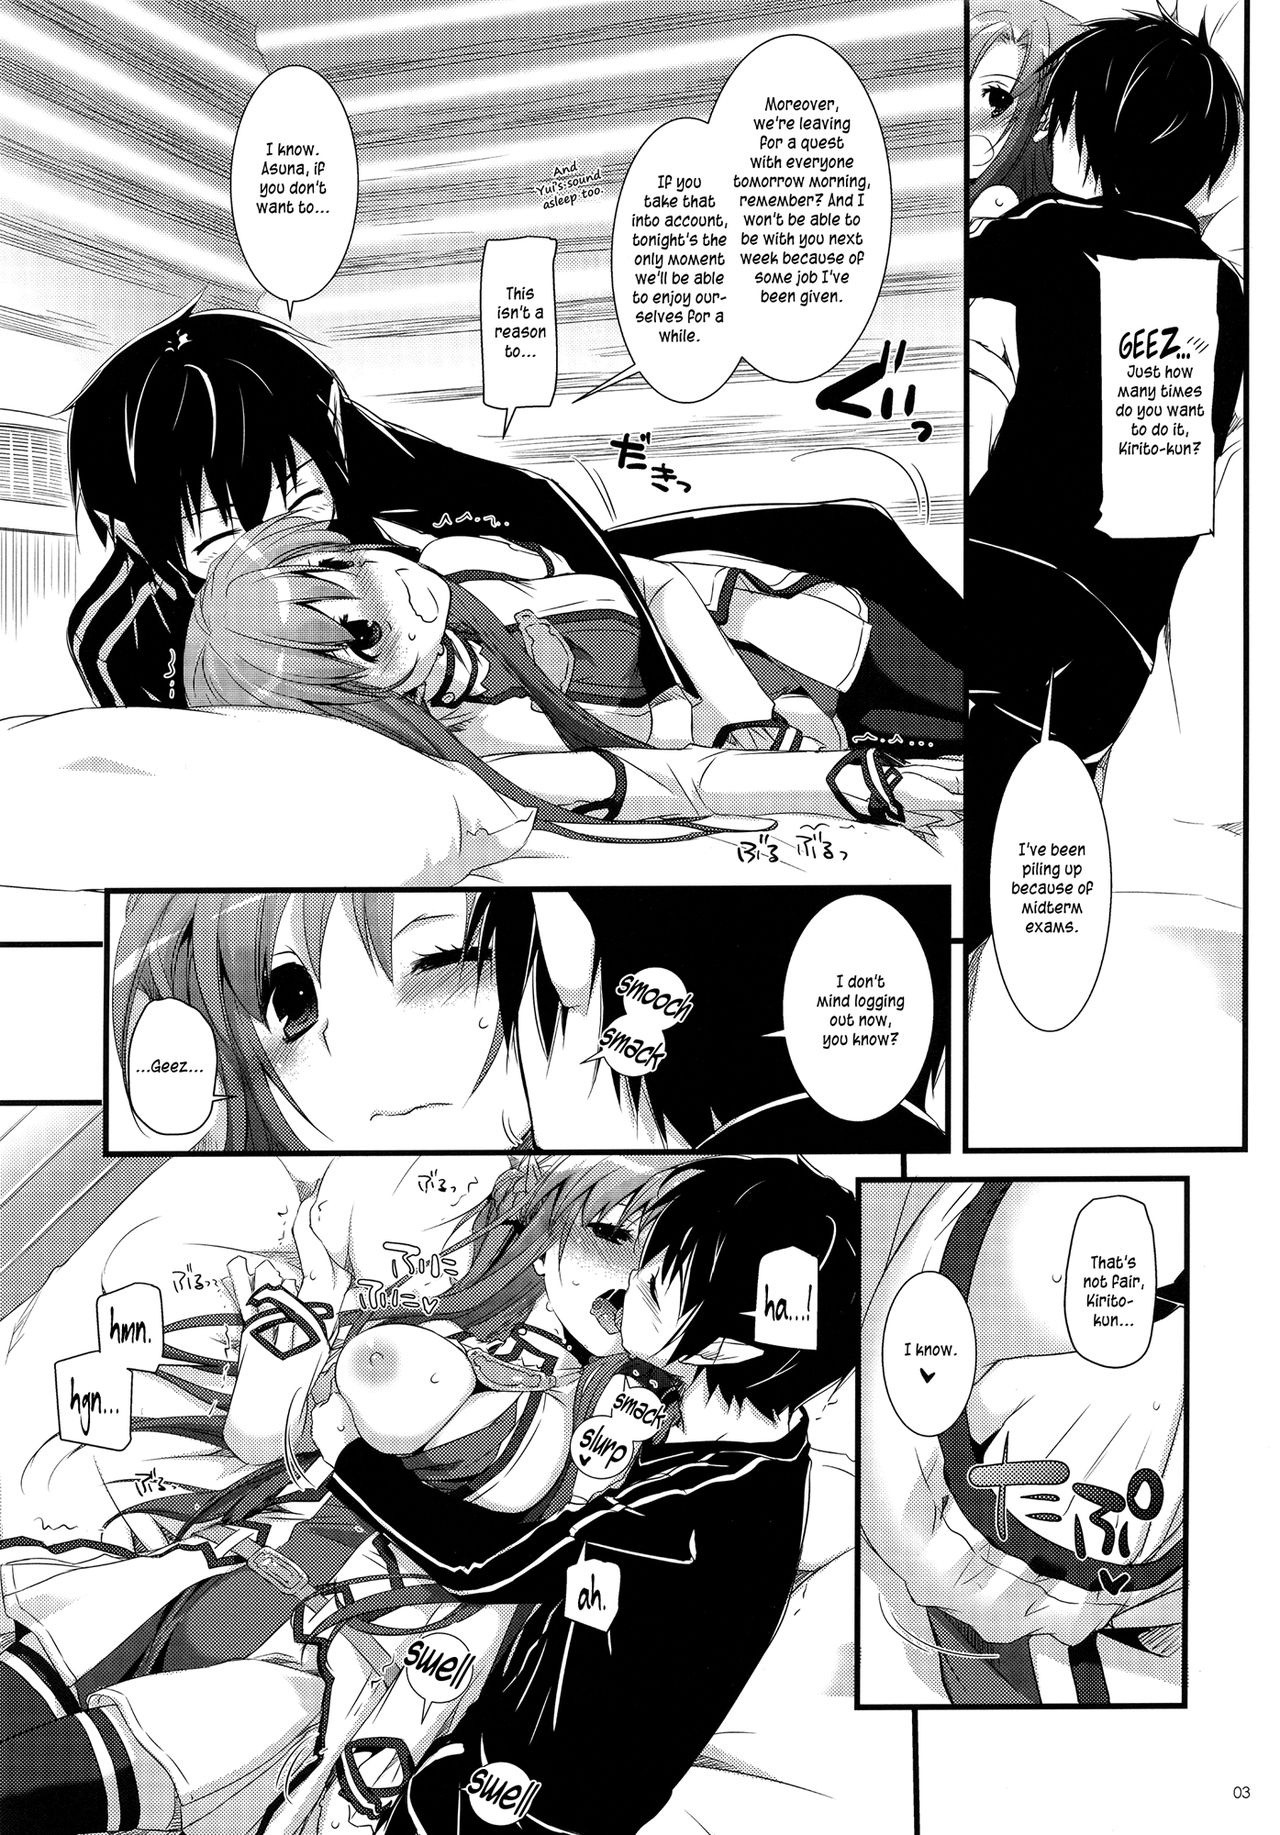 D.L. Action 72 hentai manga picture 2